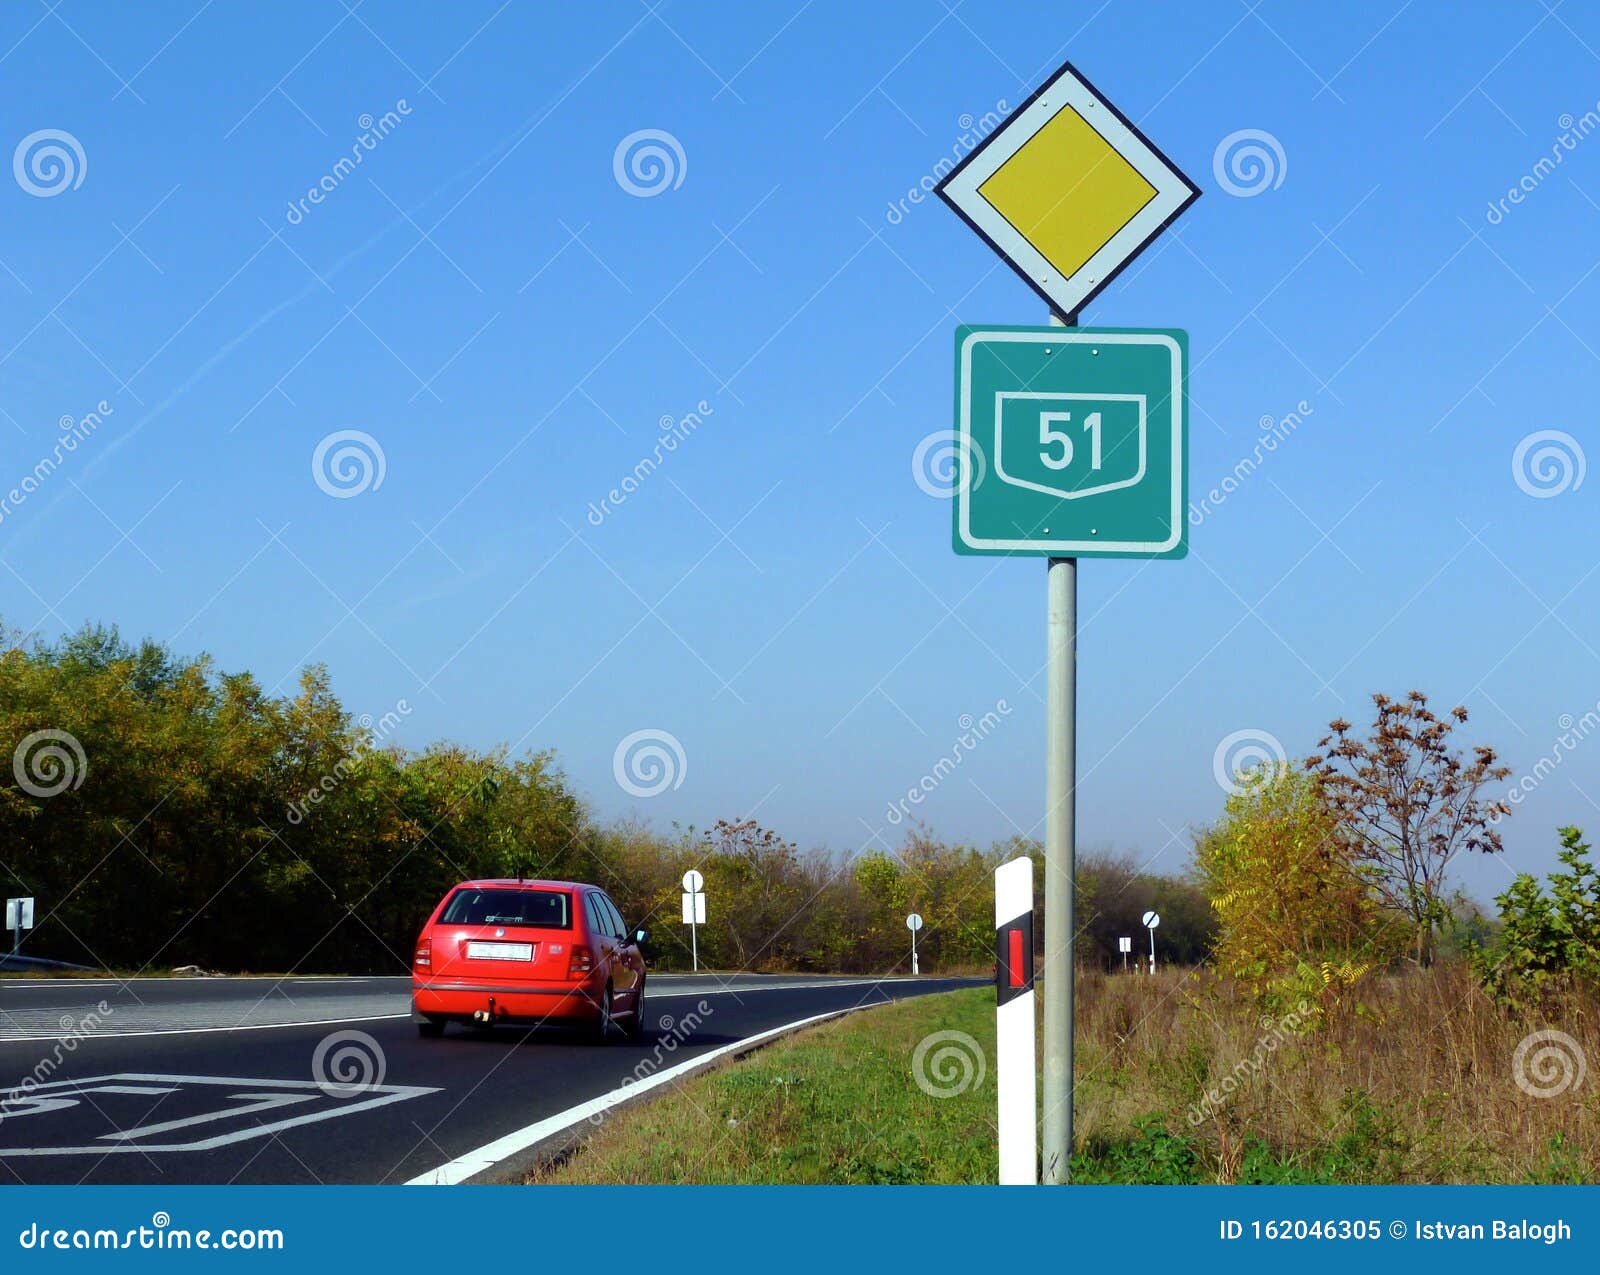 Yellow And Green Traffic Signs Highway Number 51 Road Sign Stock Image Image Of Post Info